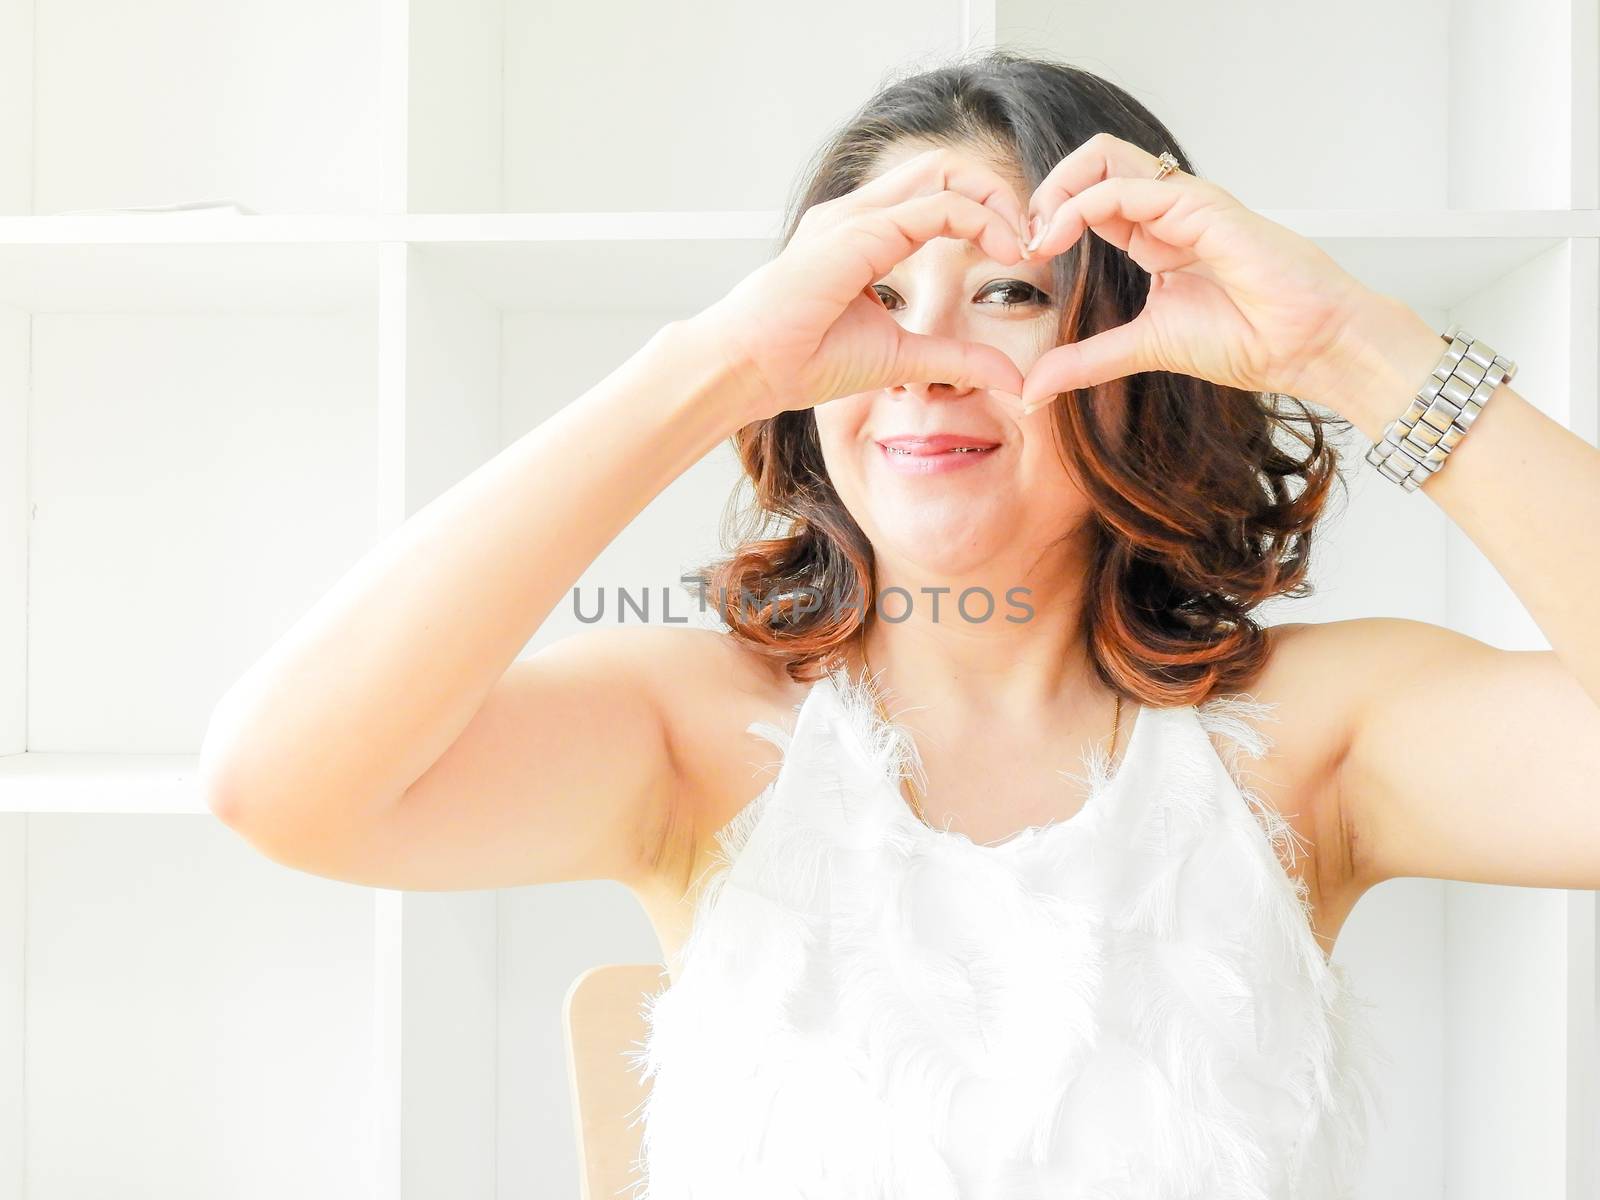 Pretty woman with smiley happy face making heart shape by her hands.
